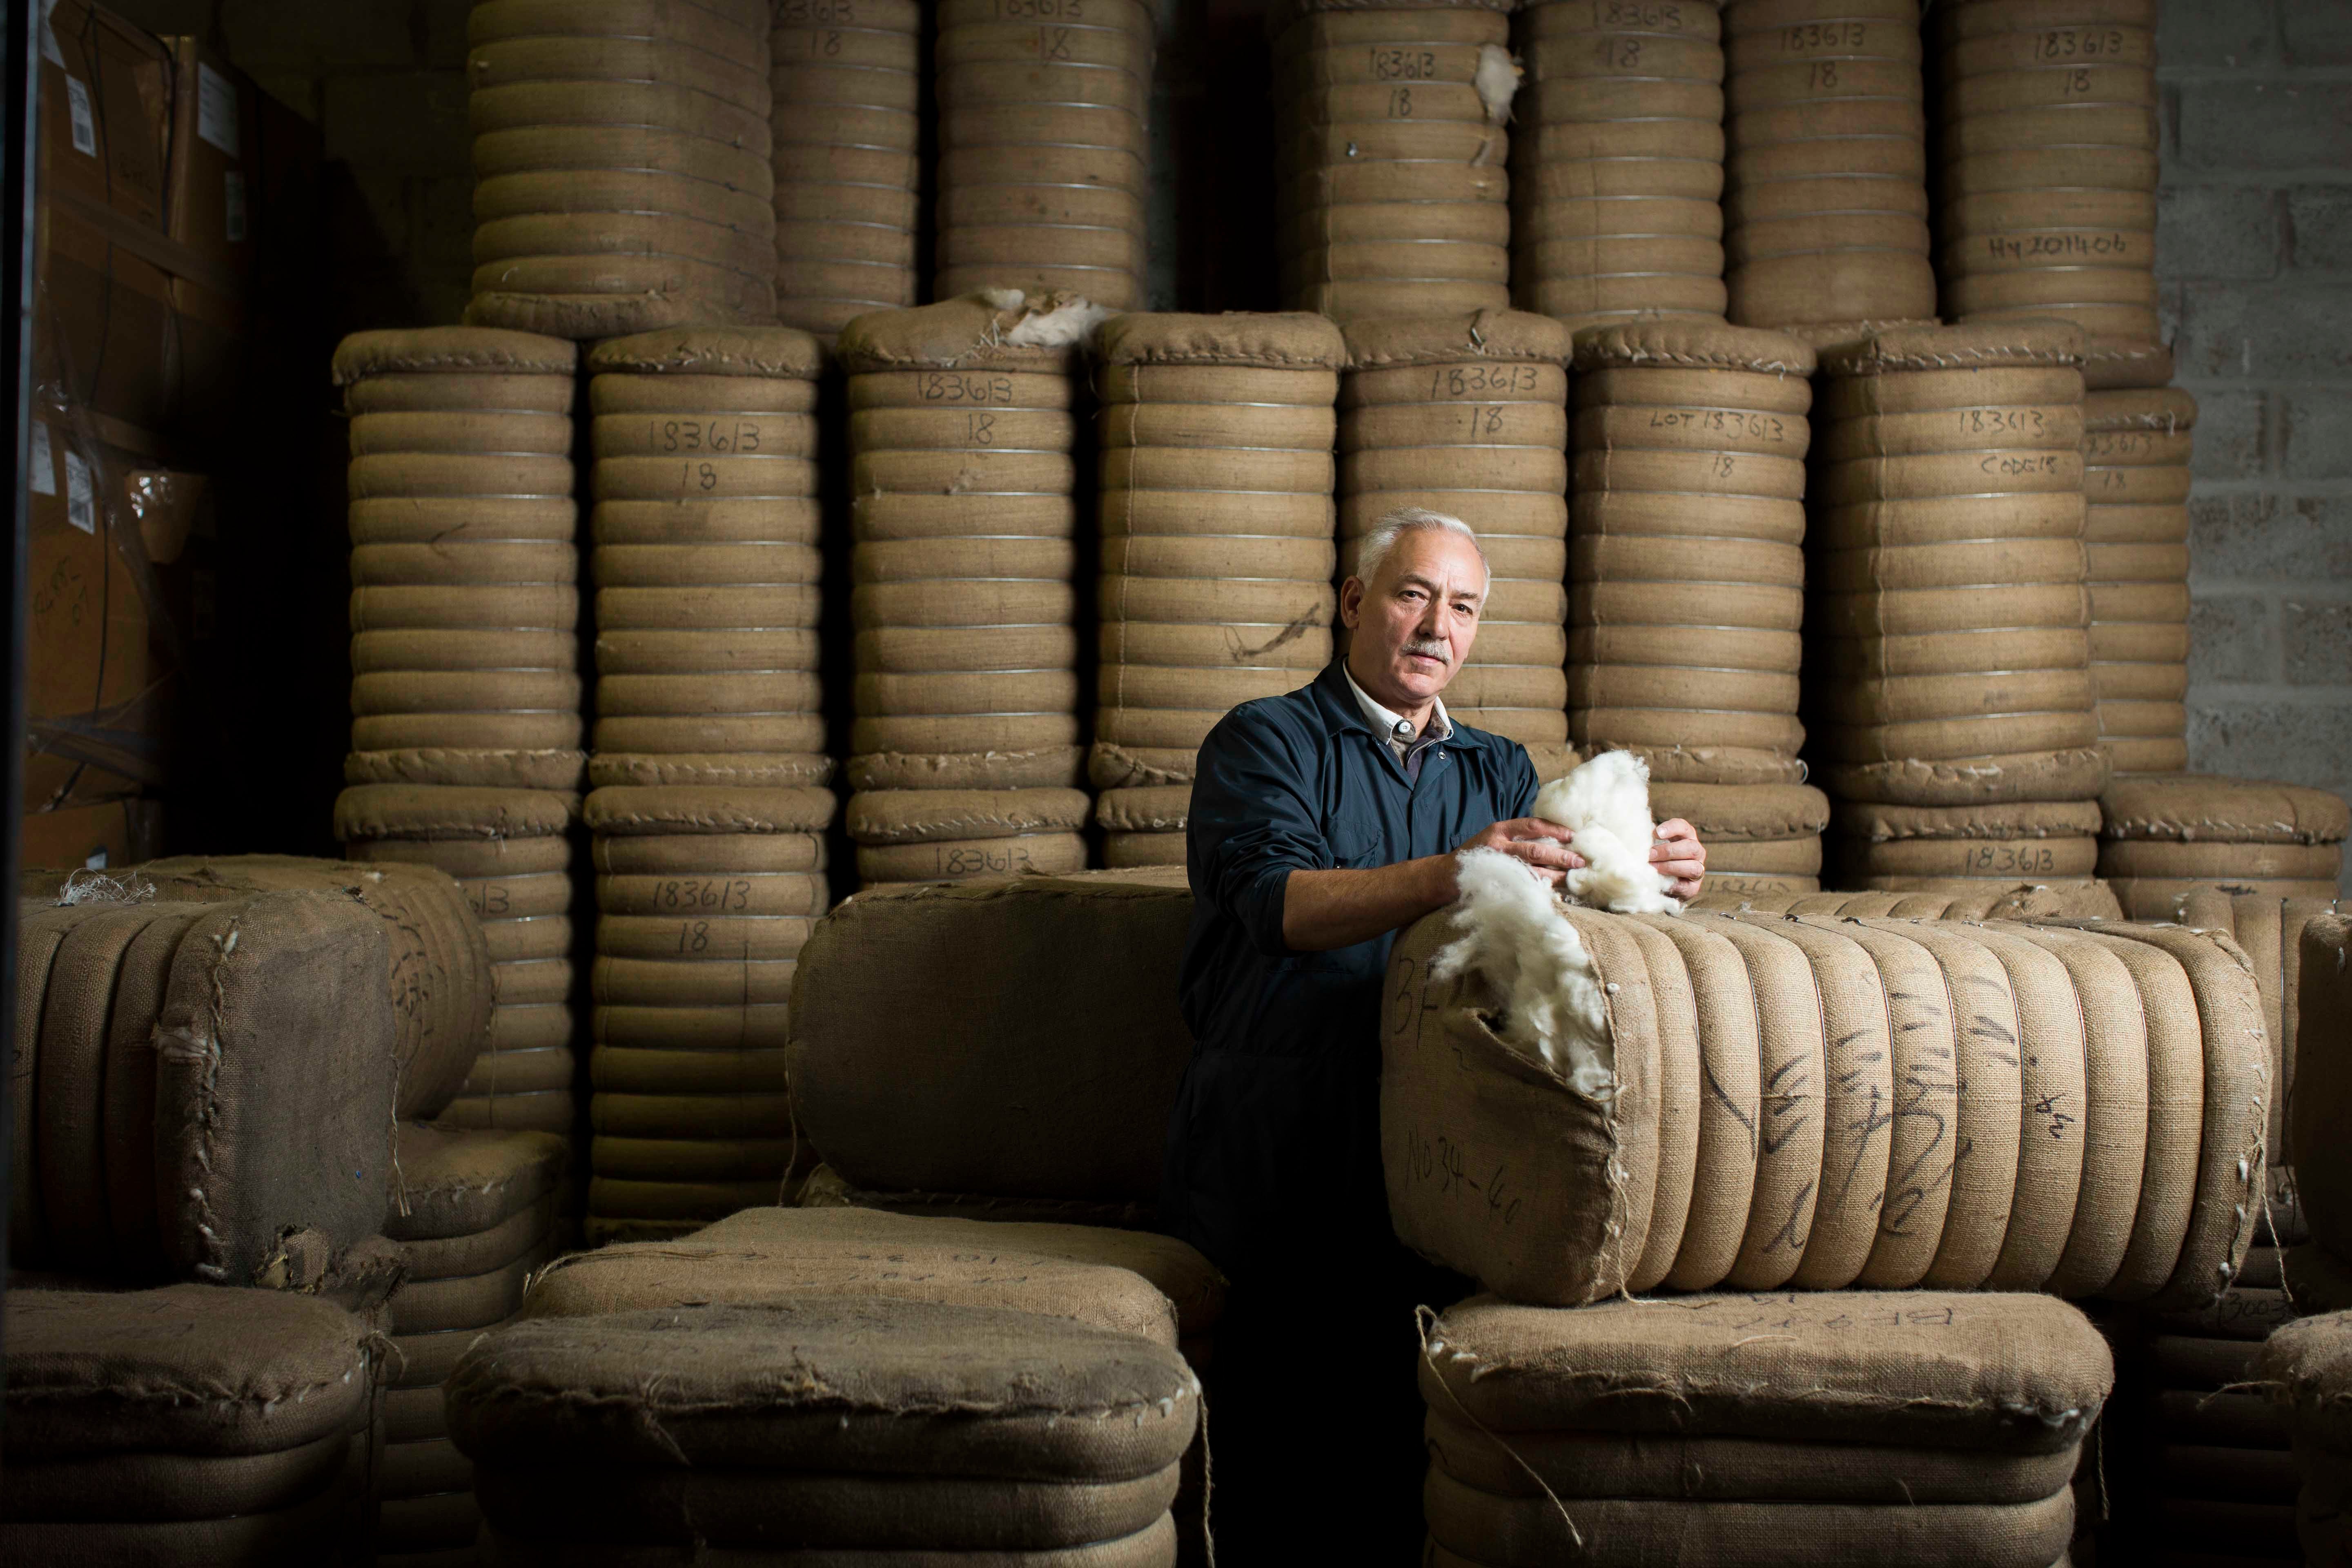 A Johnstons of Elgin wool store operative handling cashmere, which must be stored in hessian sacks so it can breathe